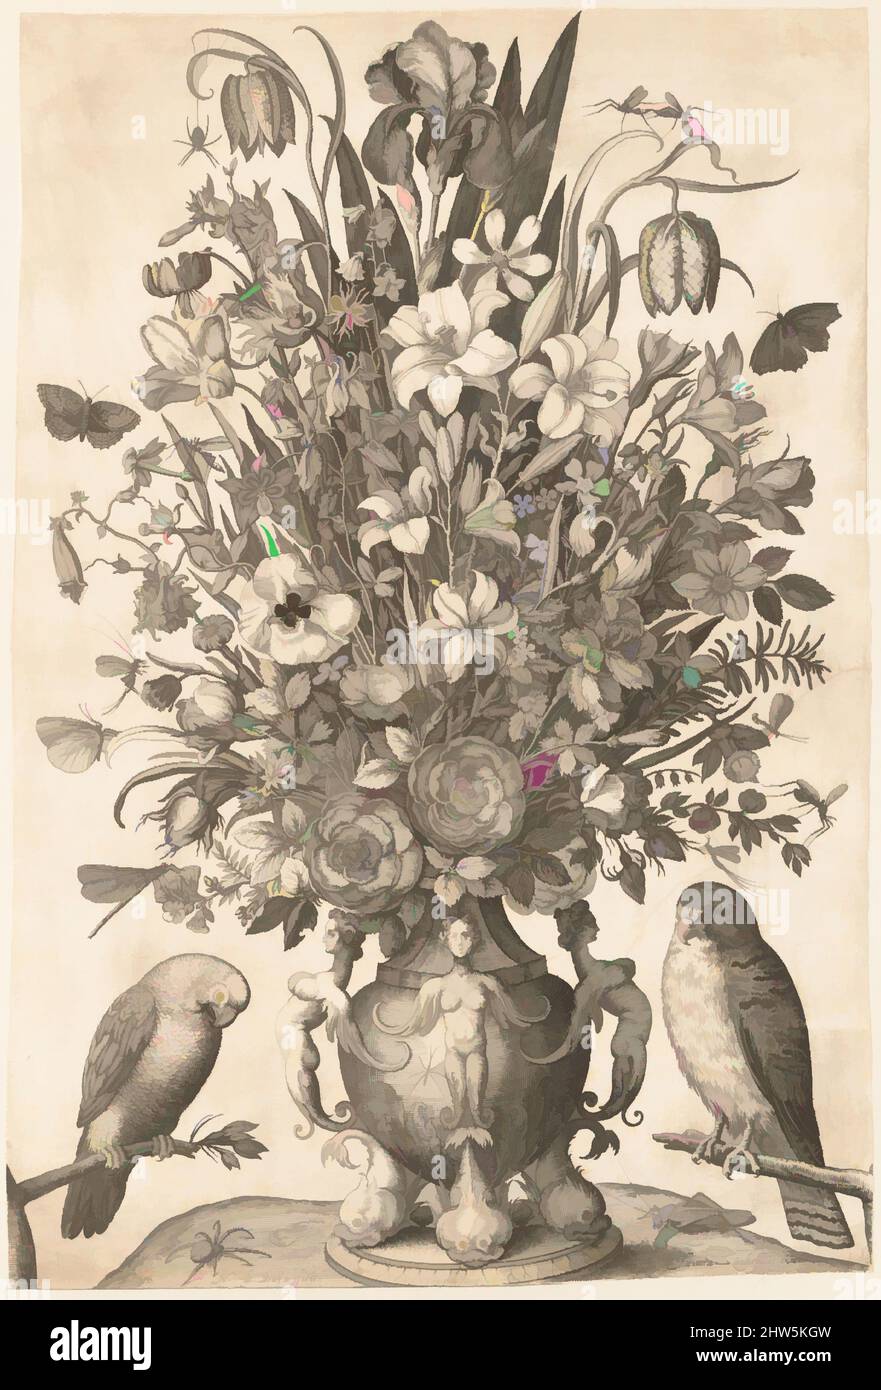 Art inspired by Vase of Flowers with Two Birds, 1590–1656, Engraving; first state of three., sheet: 23 3/8 x 15 7/8 in. (59.4 x 40.3 cm), Prints, Engraved by Nicolaes de Bruyn (Netherlandish, Antwerp 1571–1656 Rotterdam), After ? Jacob Savery I (Netherlandish, ca. 1565–1603, Classic works modernized by Artotop with a splash of modernity. Shapes, color and value, eye-catching visual impact on art. Emotions through freedom of artworks in a contemporary way. A timeless message pursuing a wildly creative new direction. Artists turning to the digital medium and creating the Artotop NFT Stock Photo